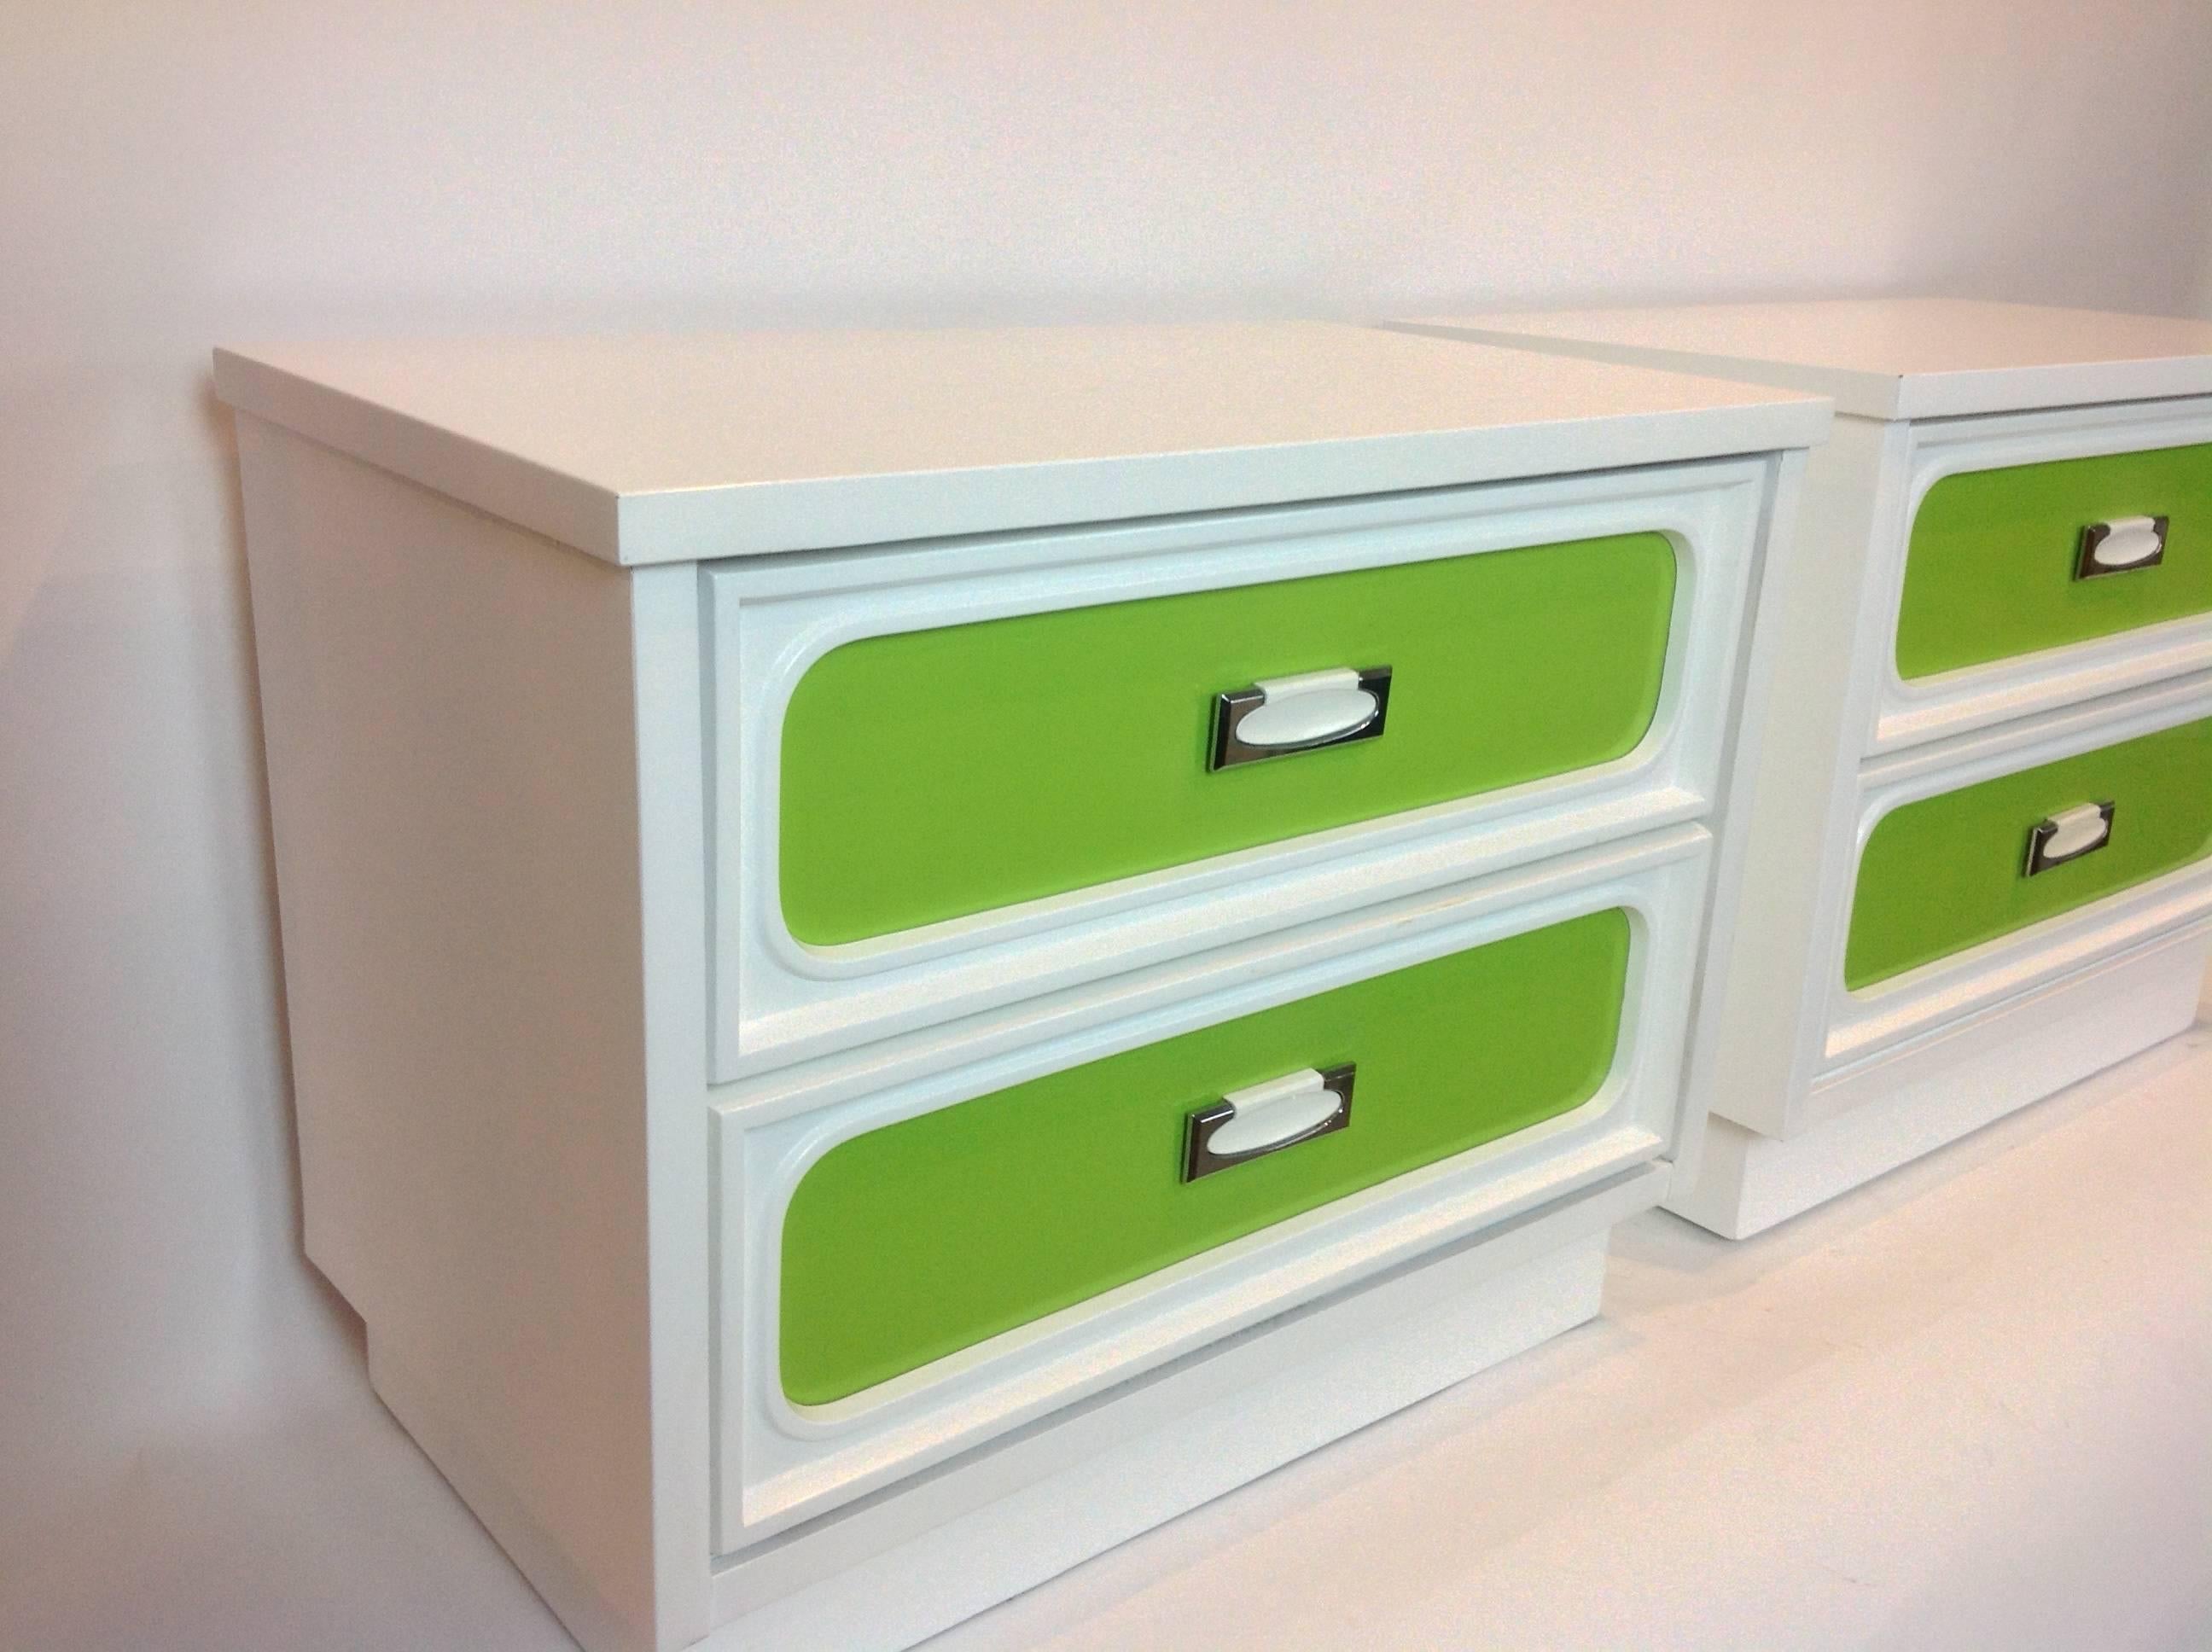 Pair of side tables or beside chests with two drawers each that have interchangeable colored plastic front panels lime green and lemon yellow.